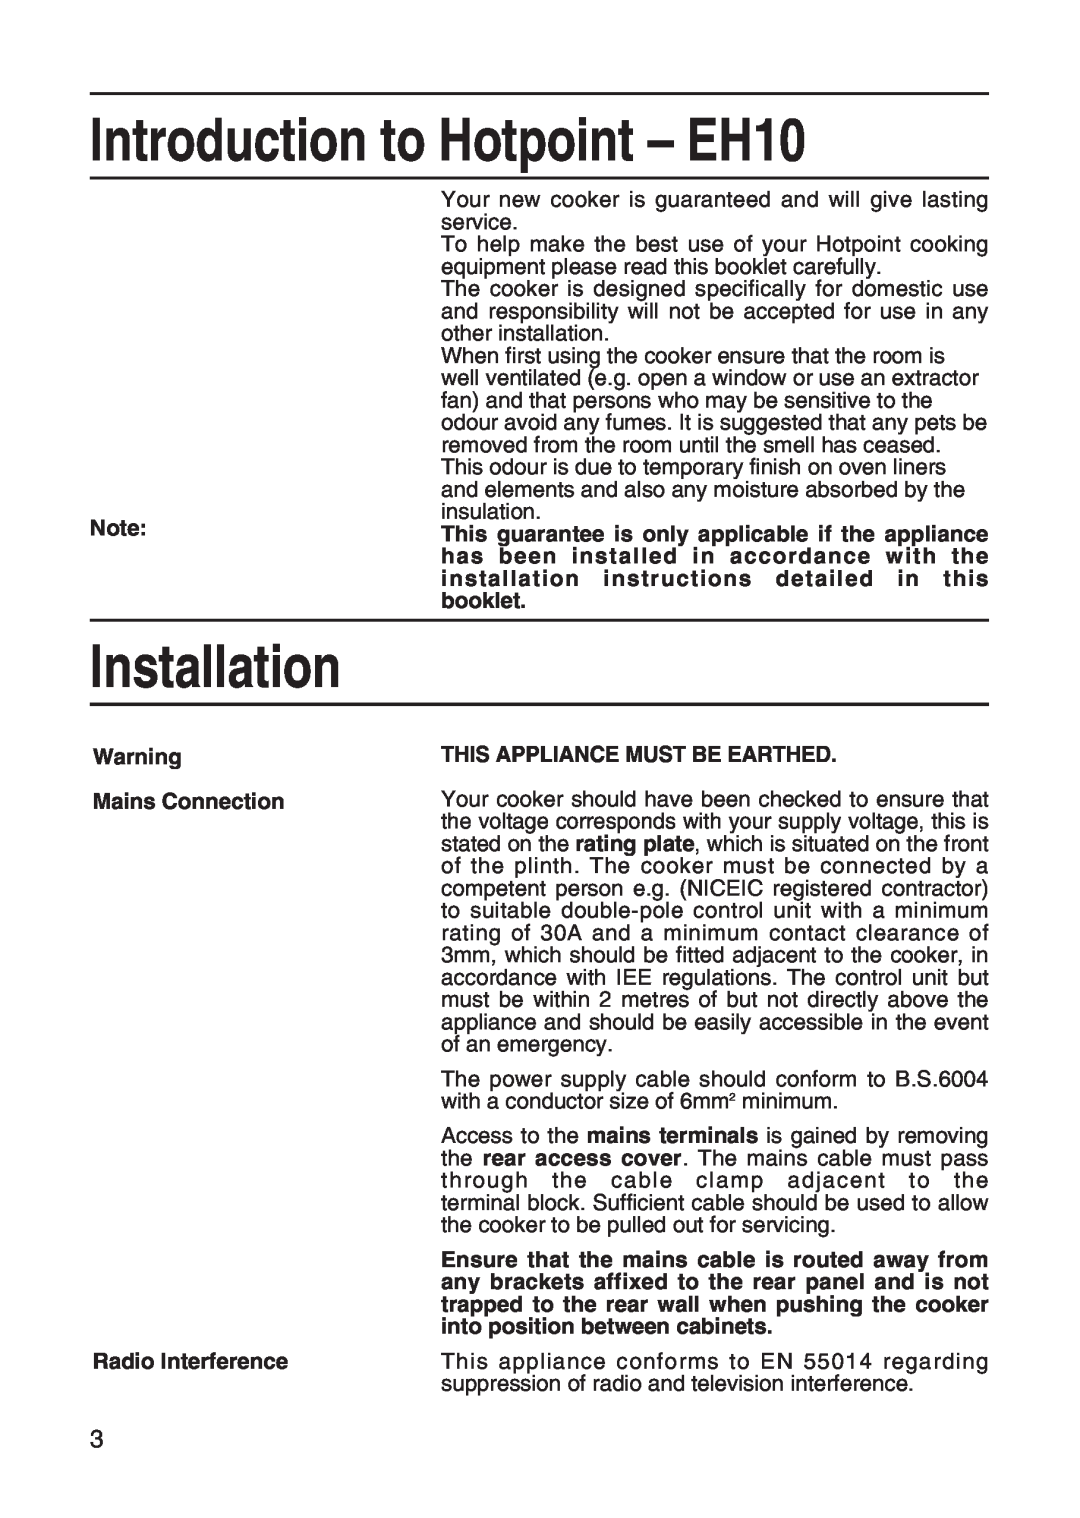 Hotpoint manual Introduction to Hotpoint - EH10, Installation, Mains Connection Radio Interference 